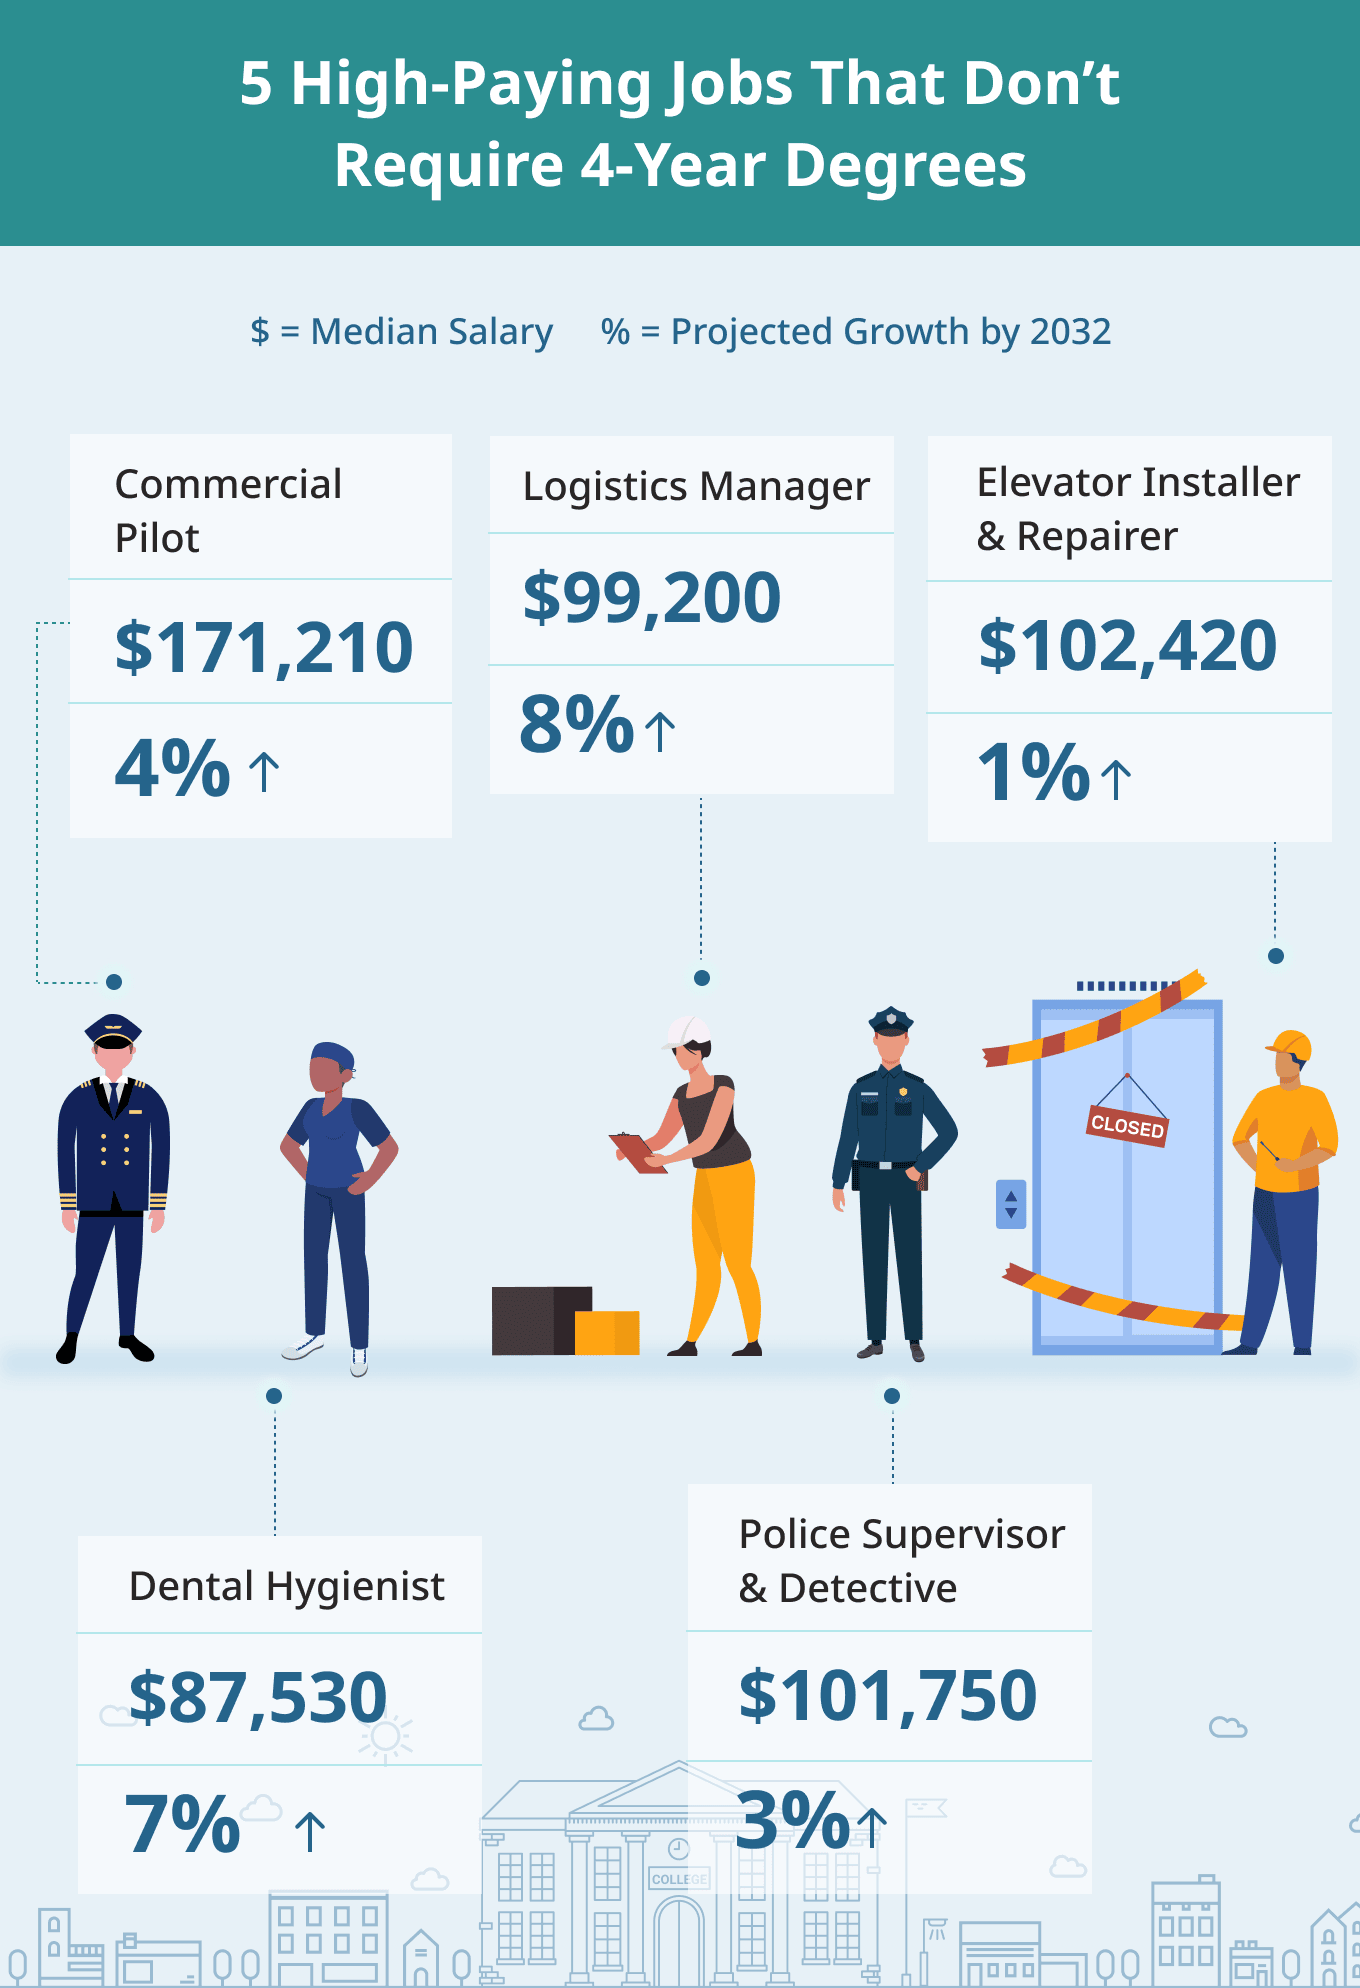 An infographic that shows 5 high-paying jobs that don't require a 4-year college degree